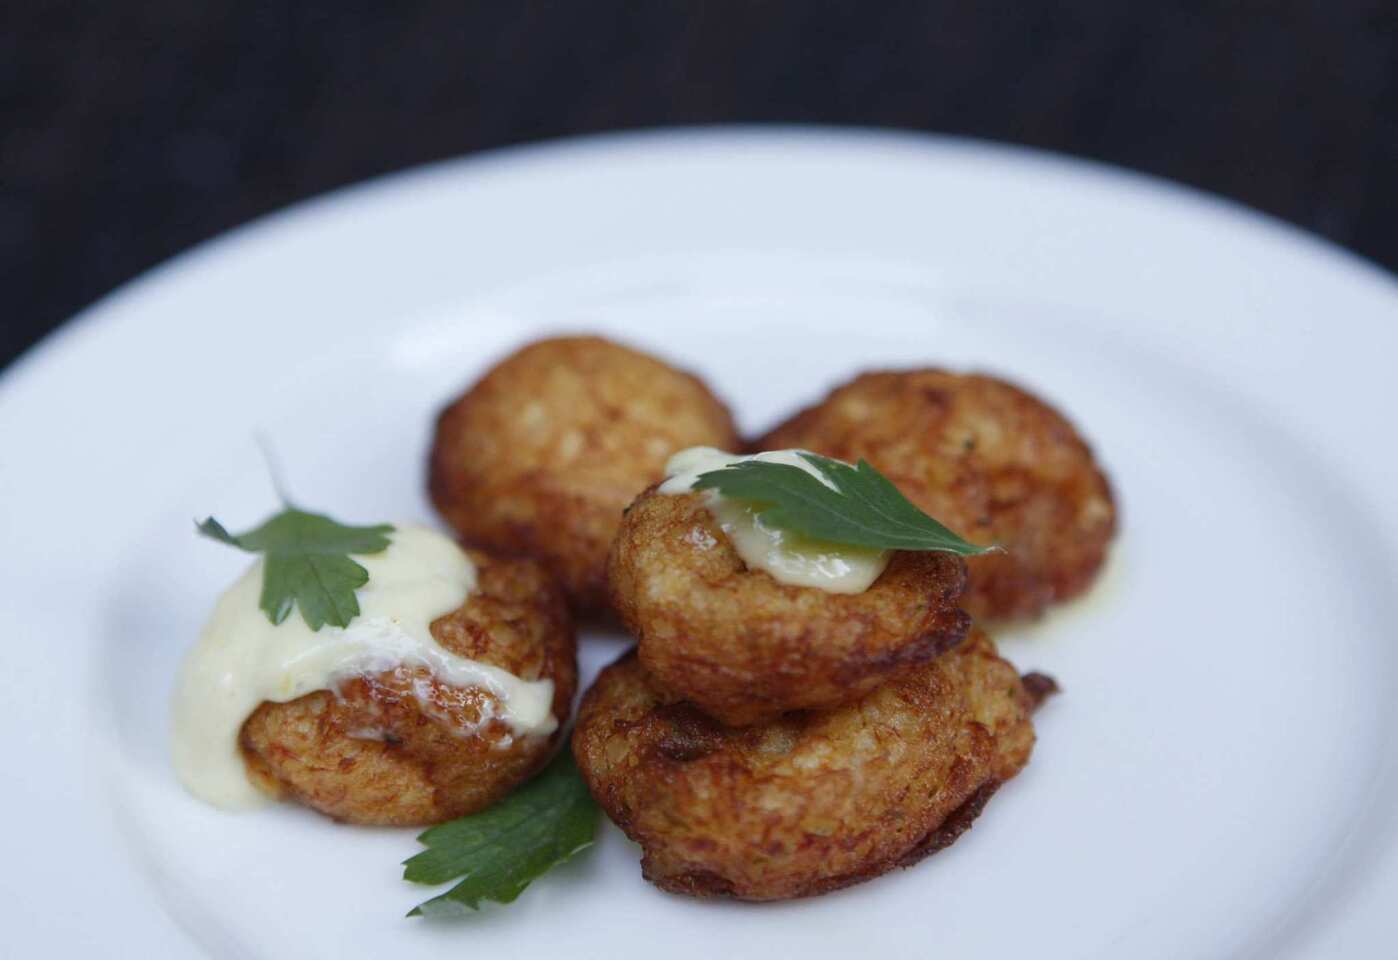 The soldaditos de pavia is a small-plate of salt cod fritters with lemon cream.